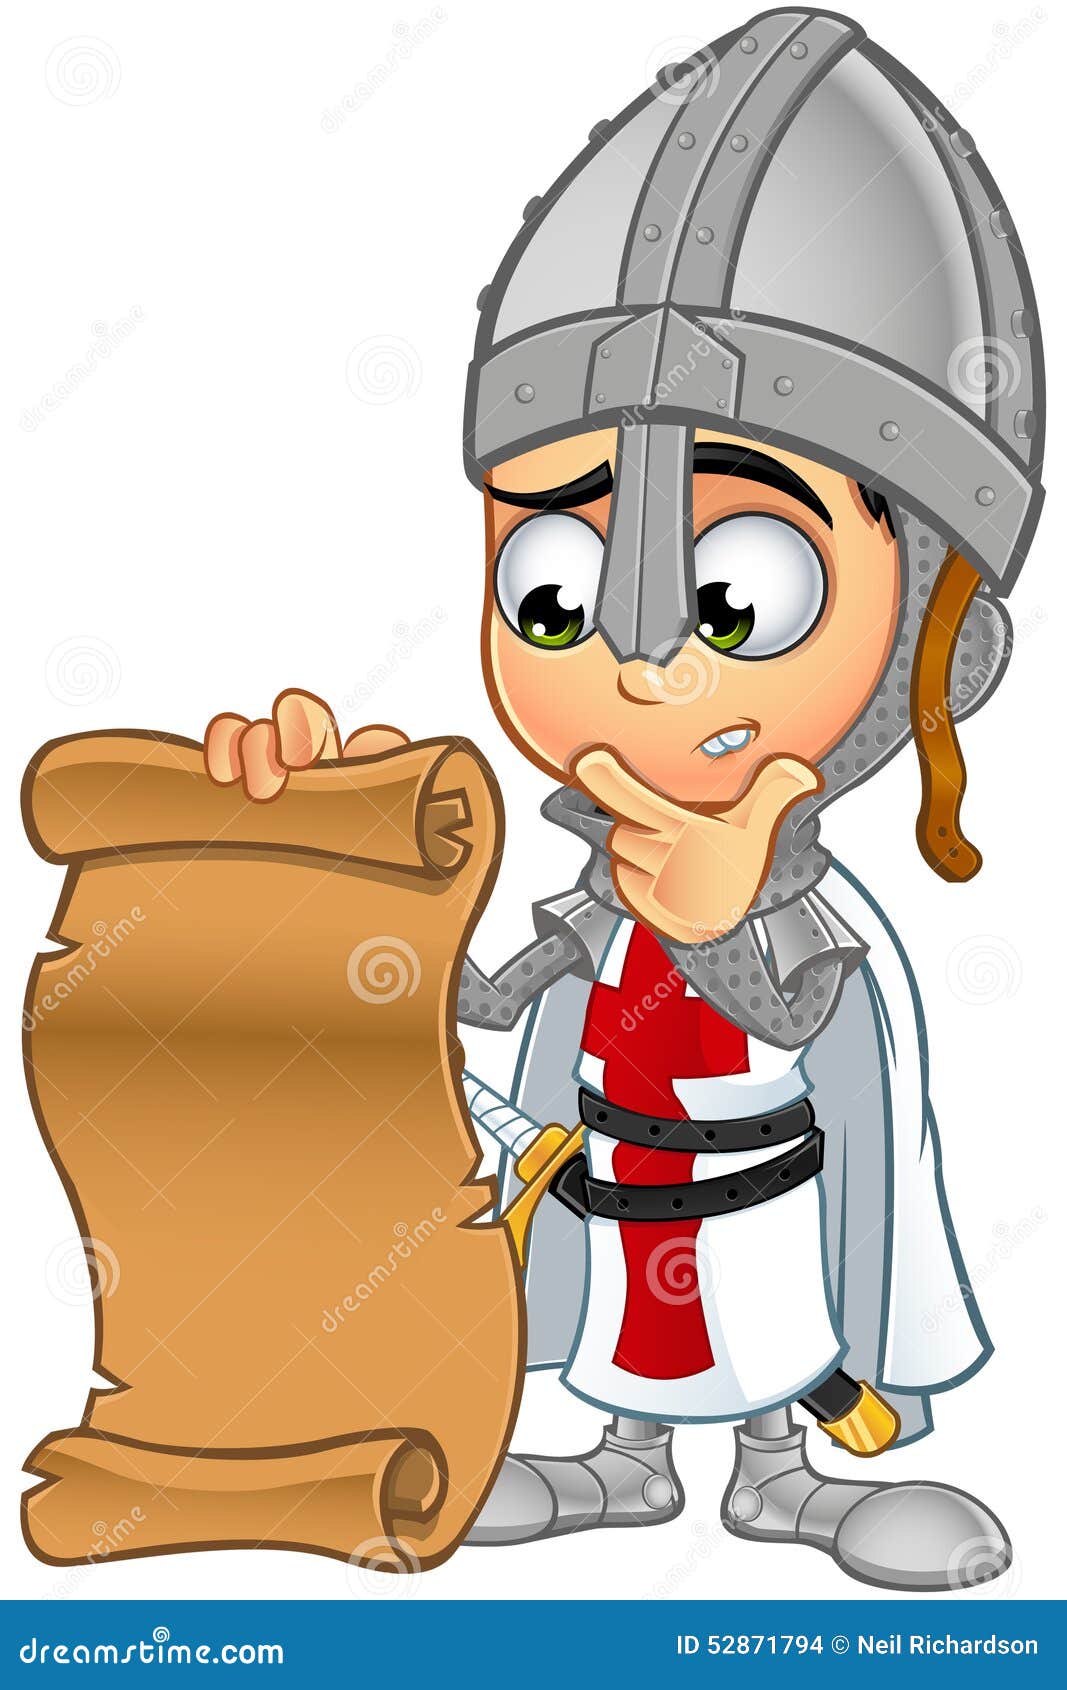 Download St. George Boy Knight Character Stock Vector - Image: 52871794